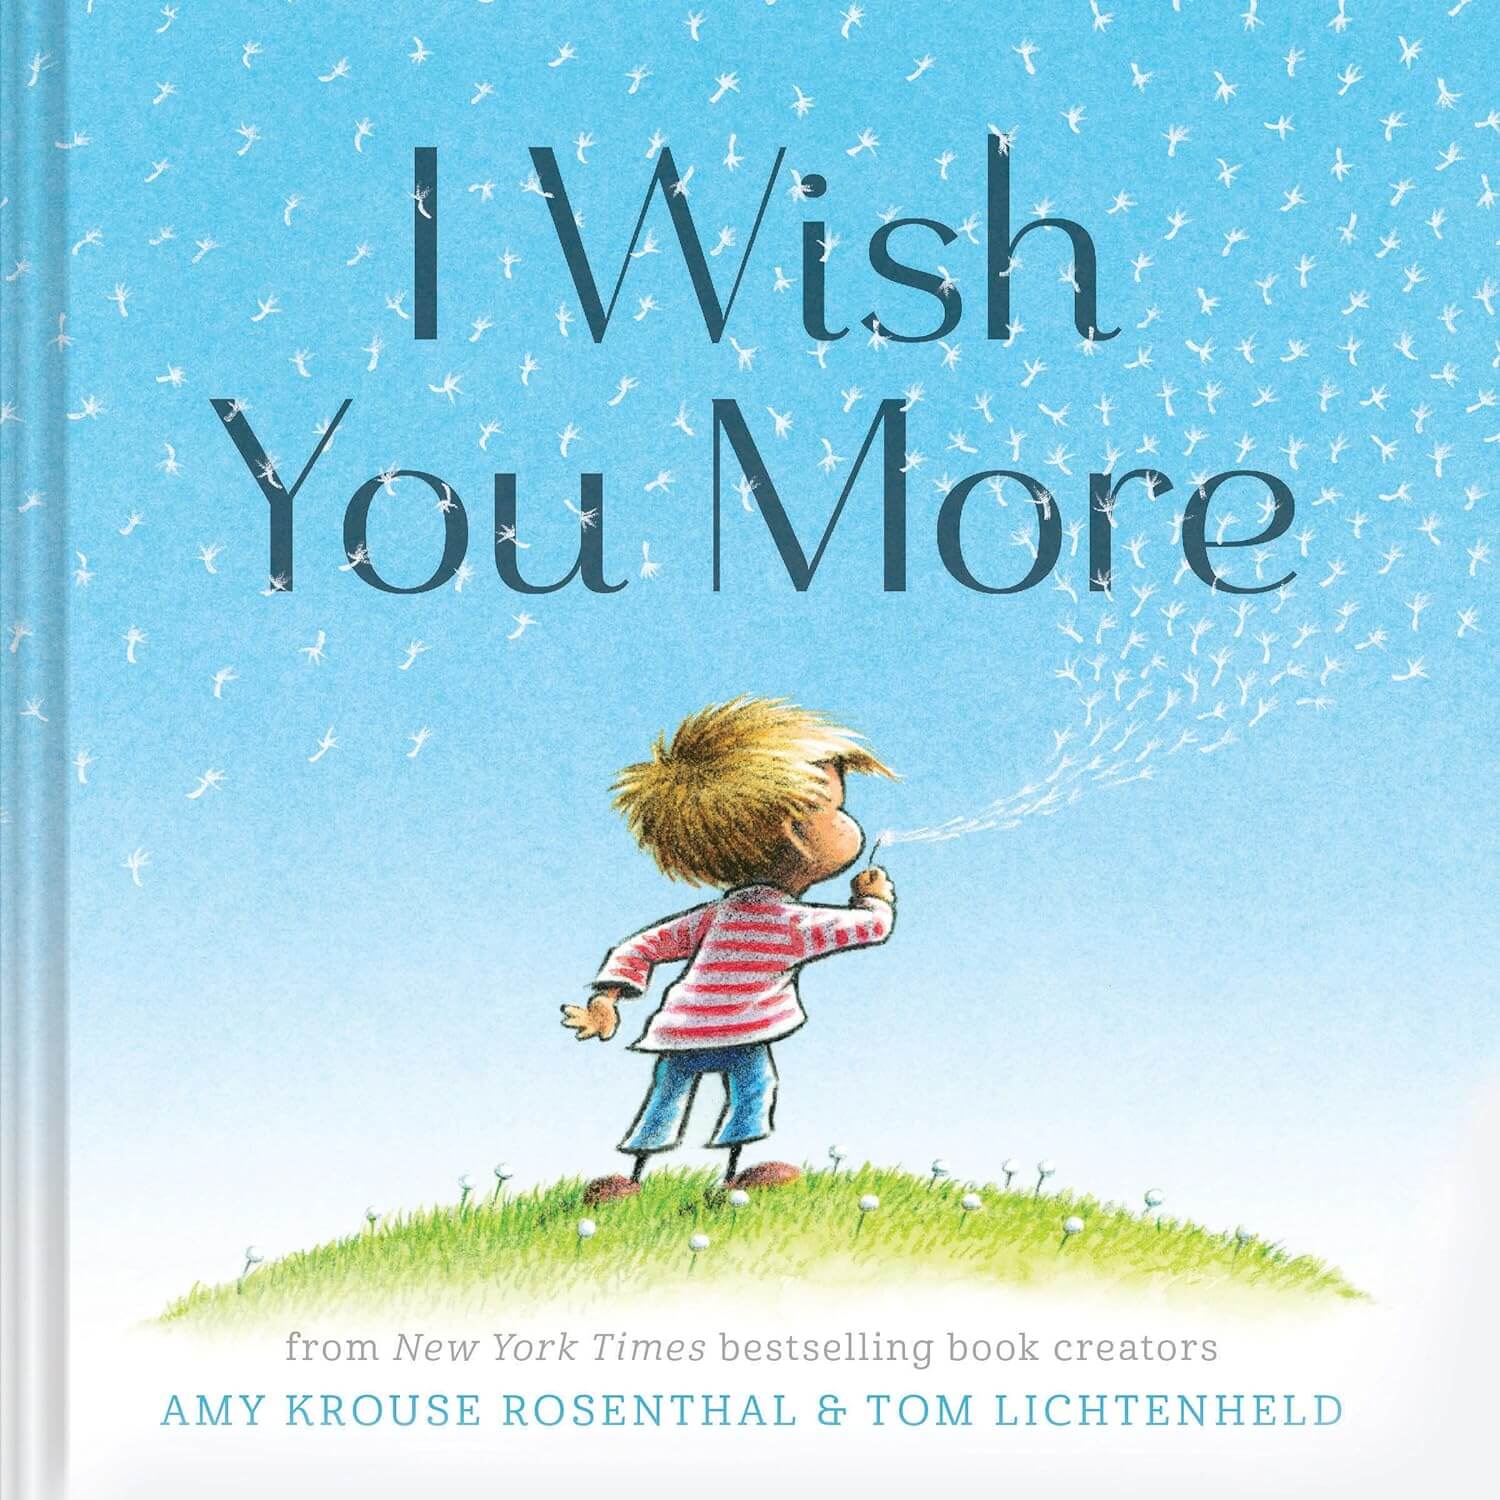 Cover art for the book I Wish You More by Amy Krouse Rosenthal & Tom Lichtenheld